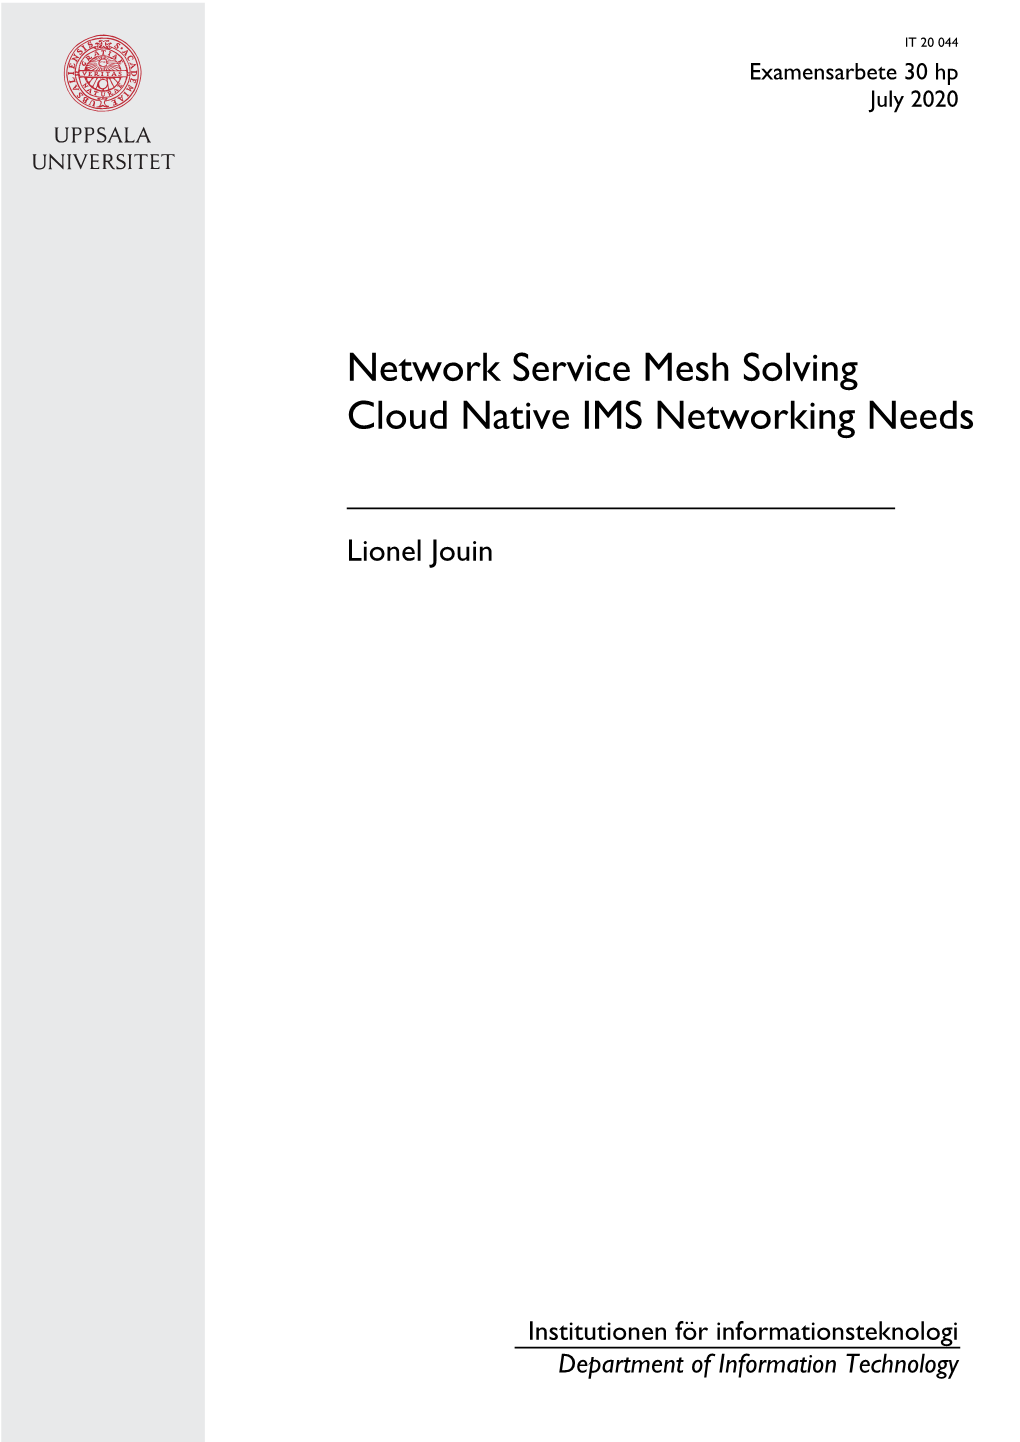 Network Service Mesh Solving Cloud Native IMS Networking Needs